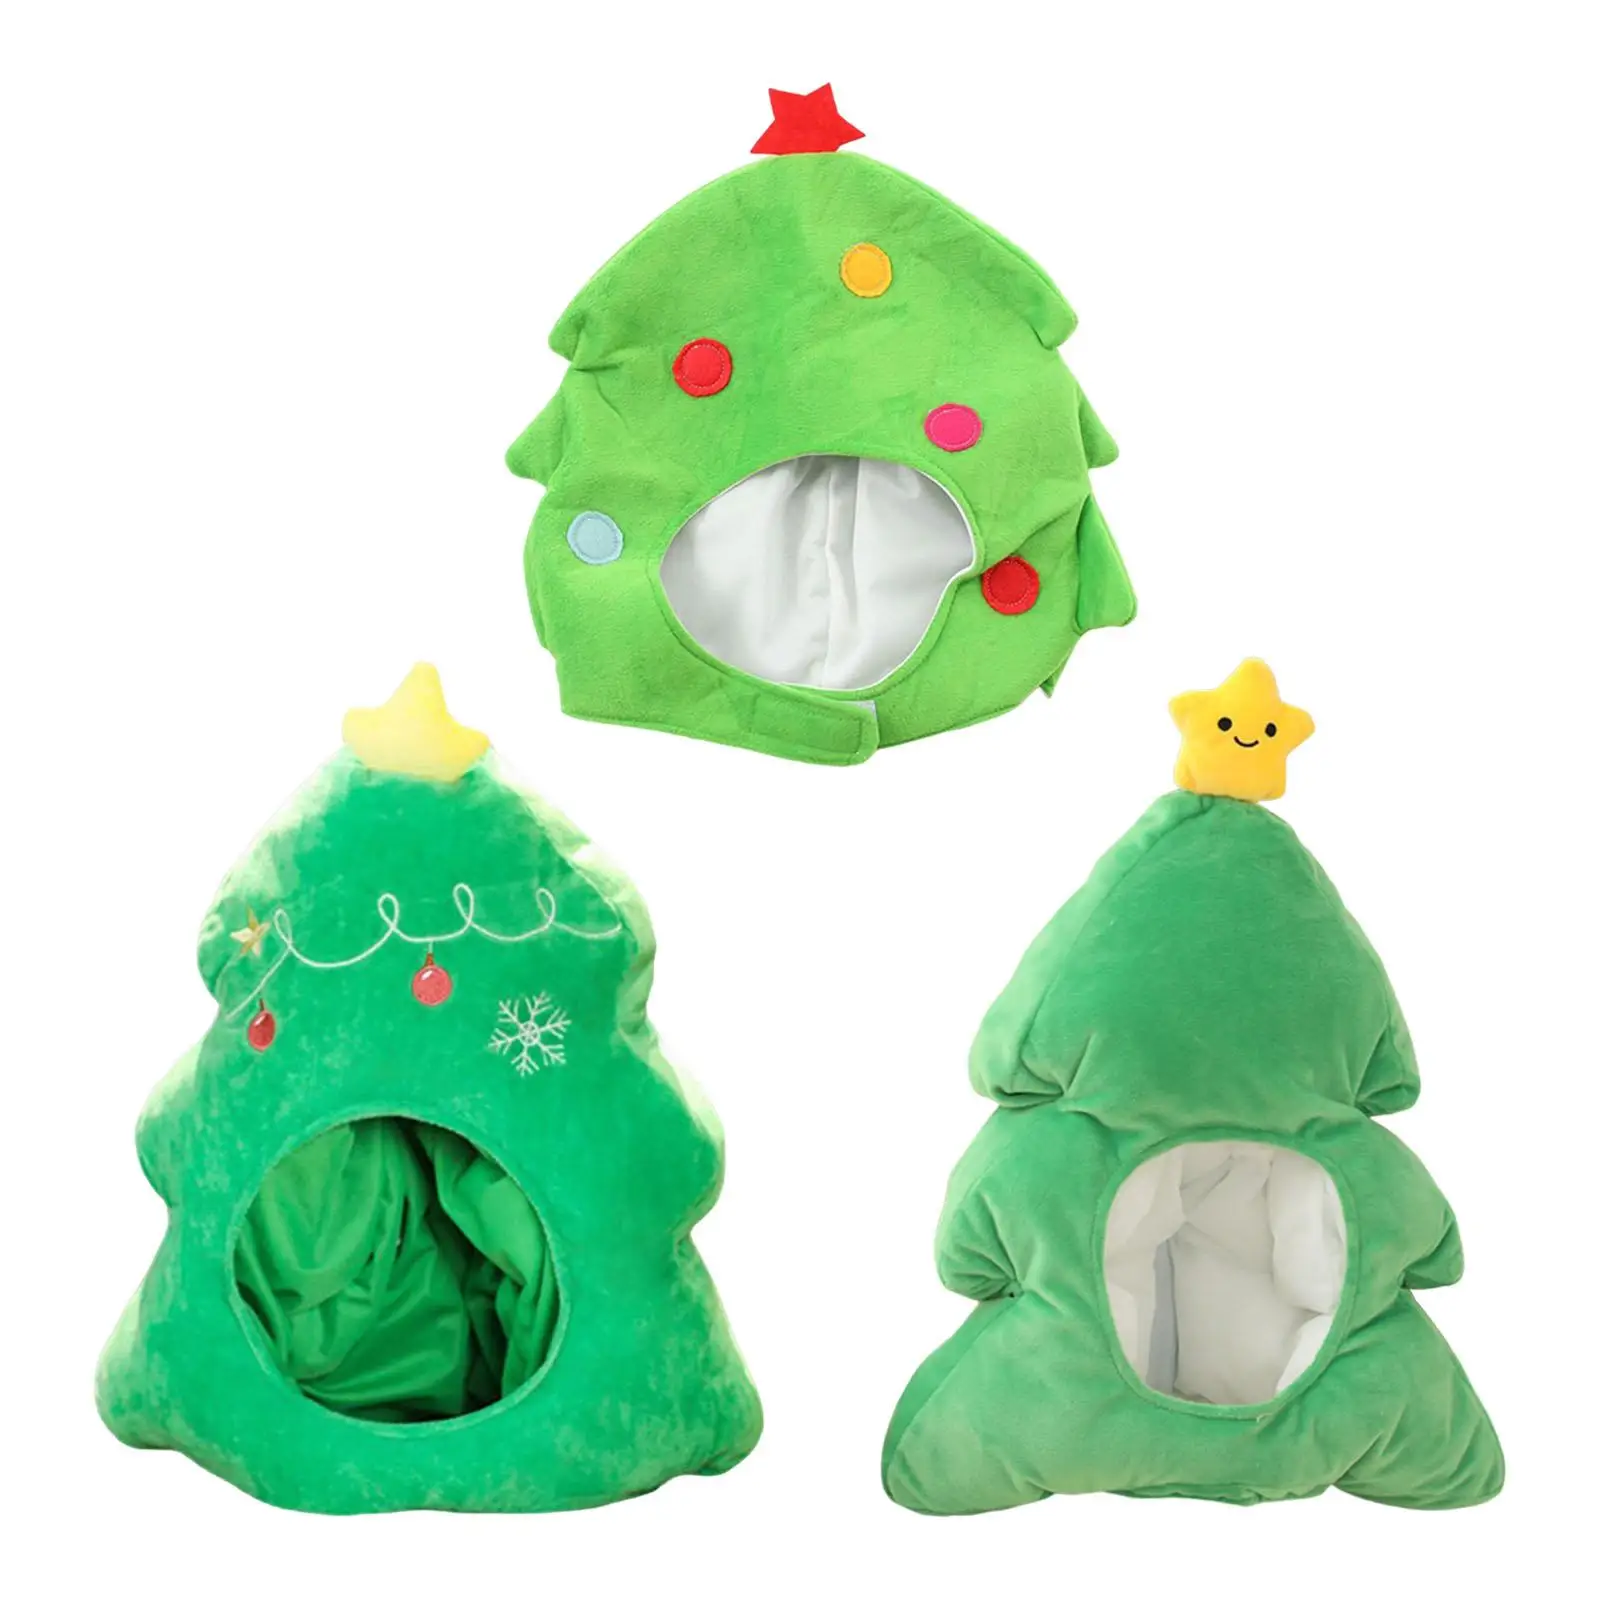 Funny Christmas Tree Plush Hat Cozy Comfortable Creative Gift Unisex Xmas cap for Cosplay Costume Festival Dress up